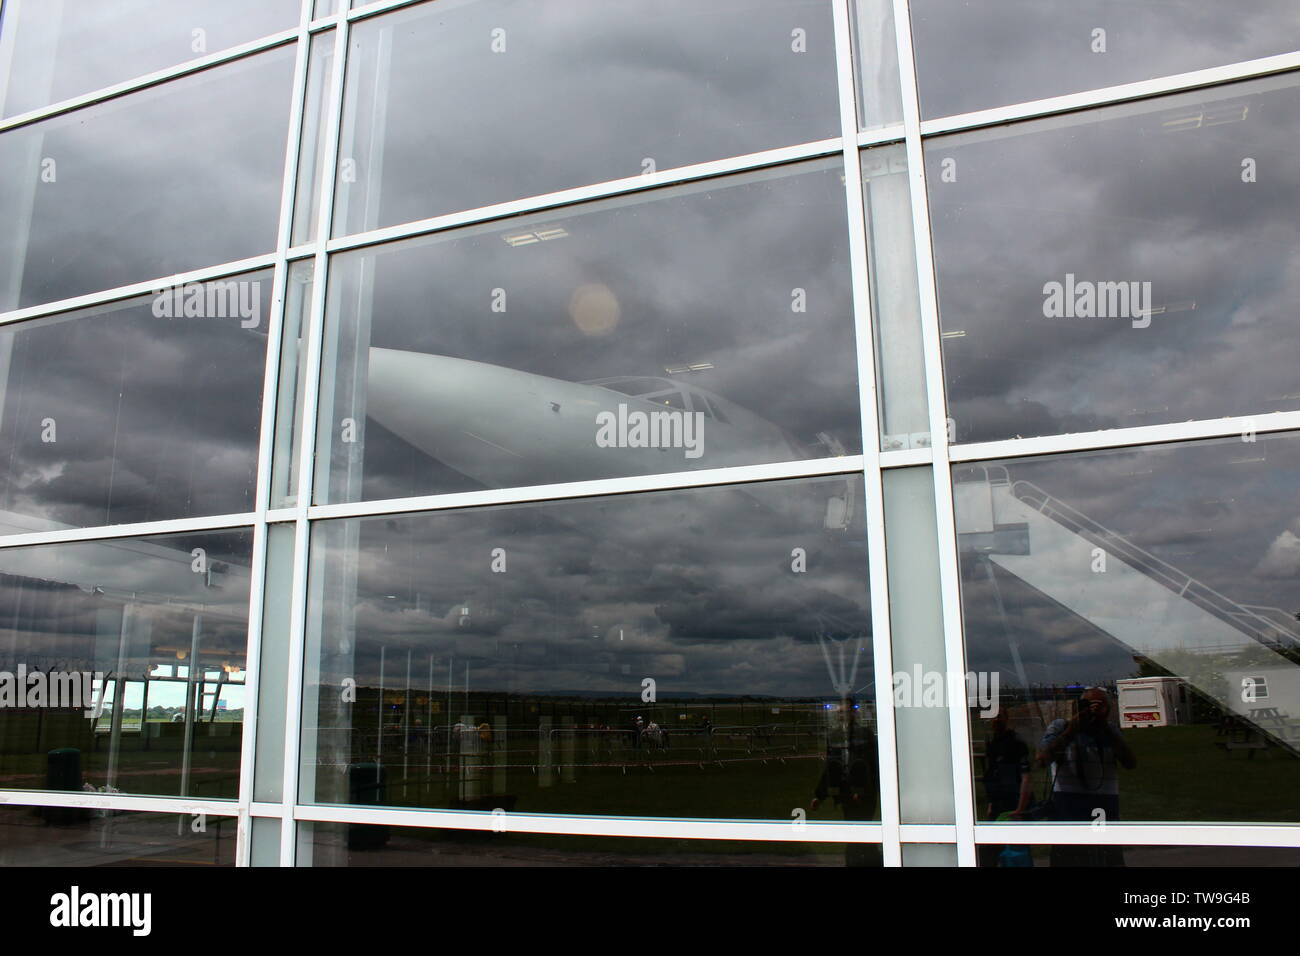 Families visiting Manchester airport's runway visitor park watching the aircraft come and go Stock Photo